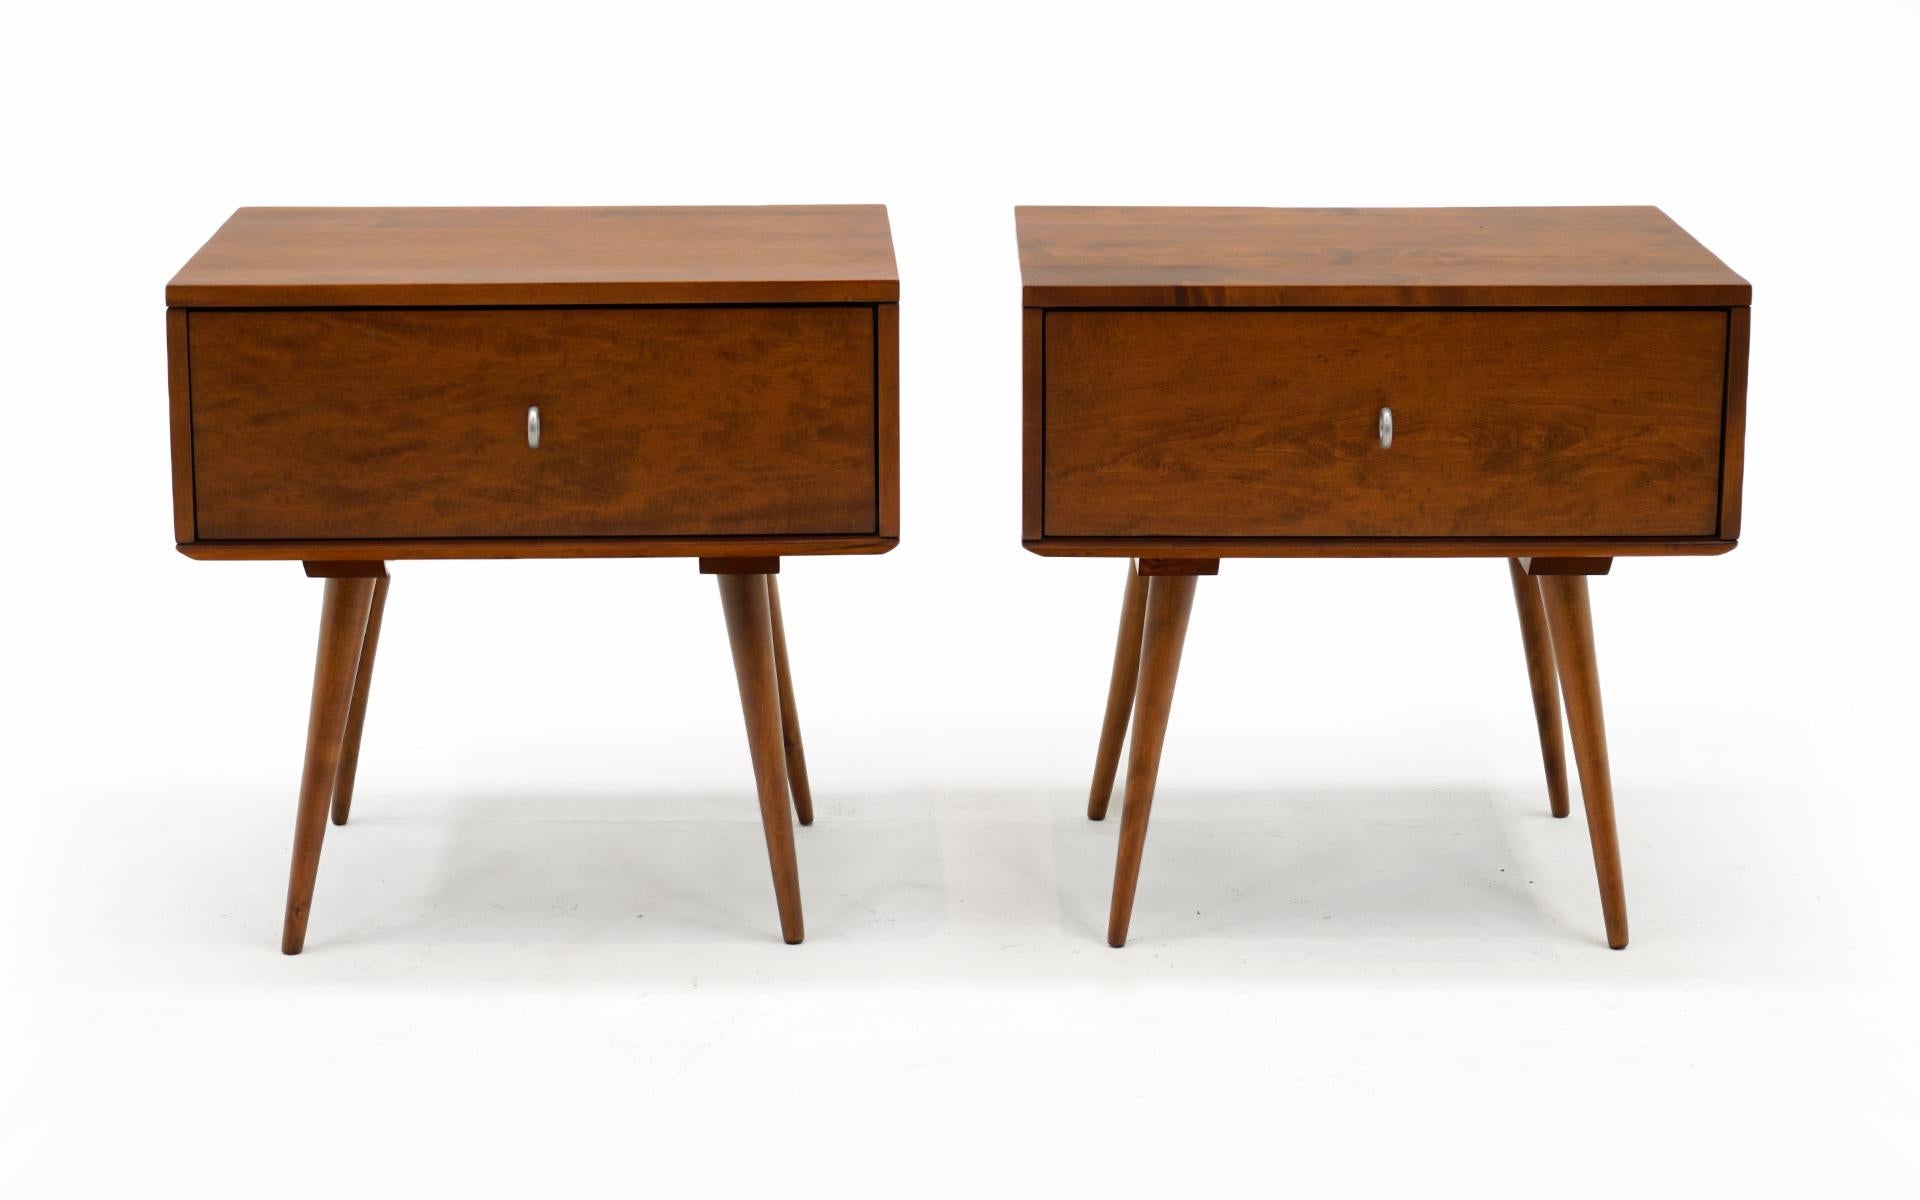 Pair of Paul McCobb nightstands or side tables in medium to dark stained birch. These are part of McCobb's Planner Group for Winchendon Modern, 1950s. Each has one single drawer with nickel pulls. Expertly refinished and ready to use.